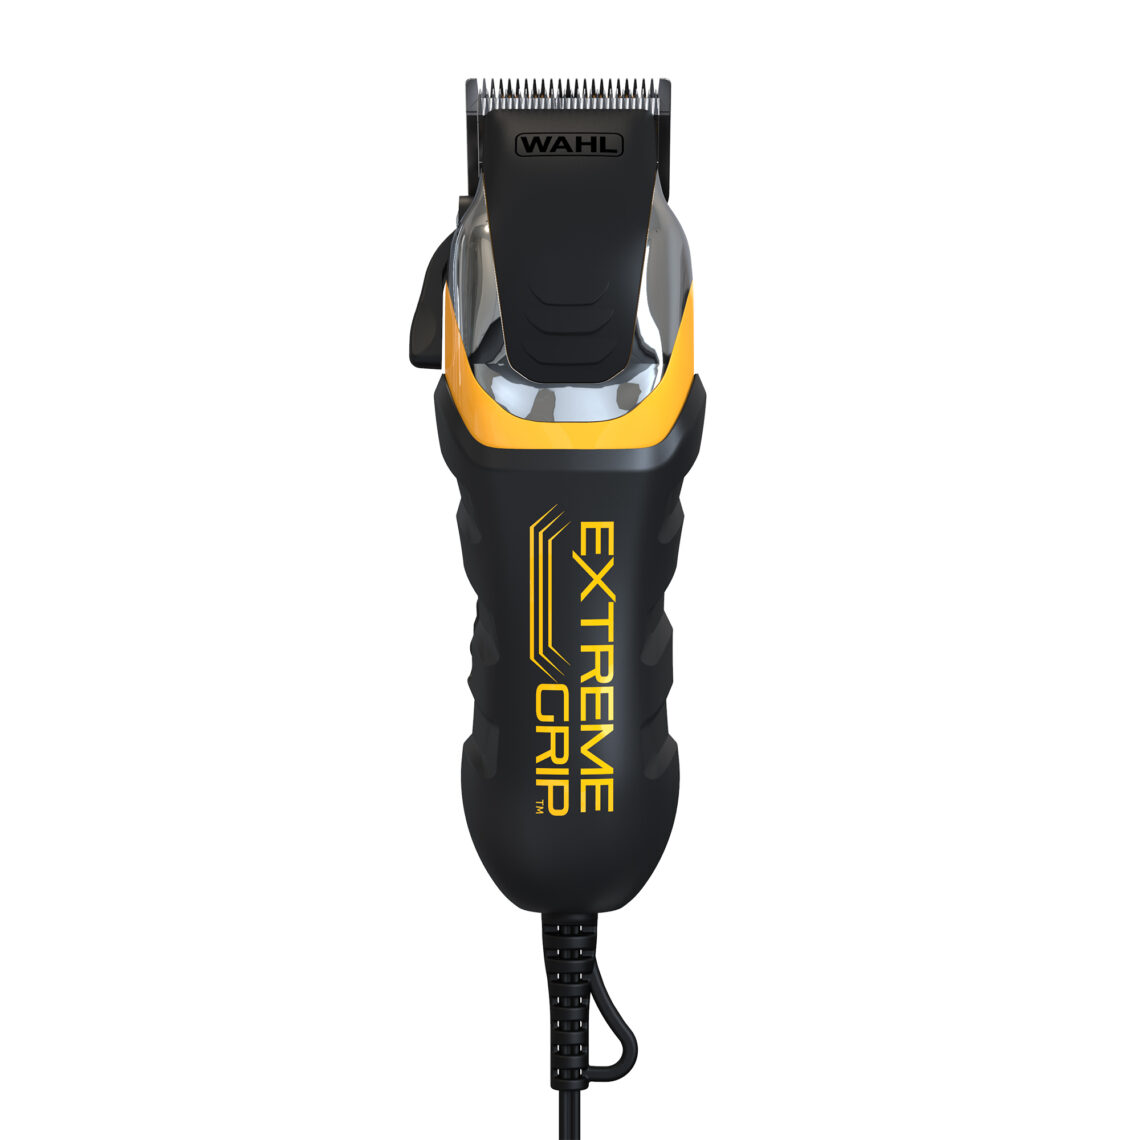 wahl extreme grip pro clippers